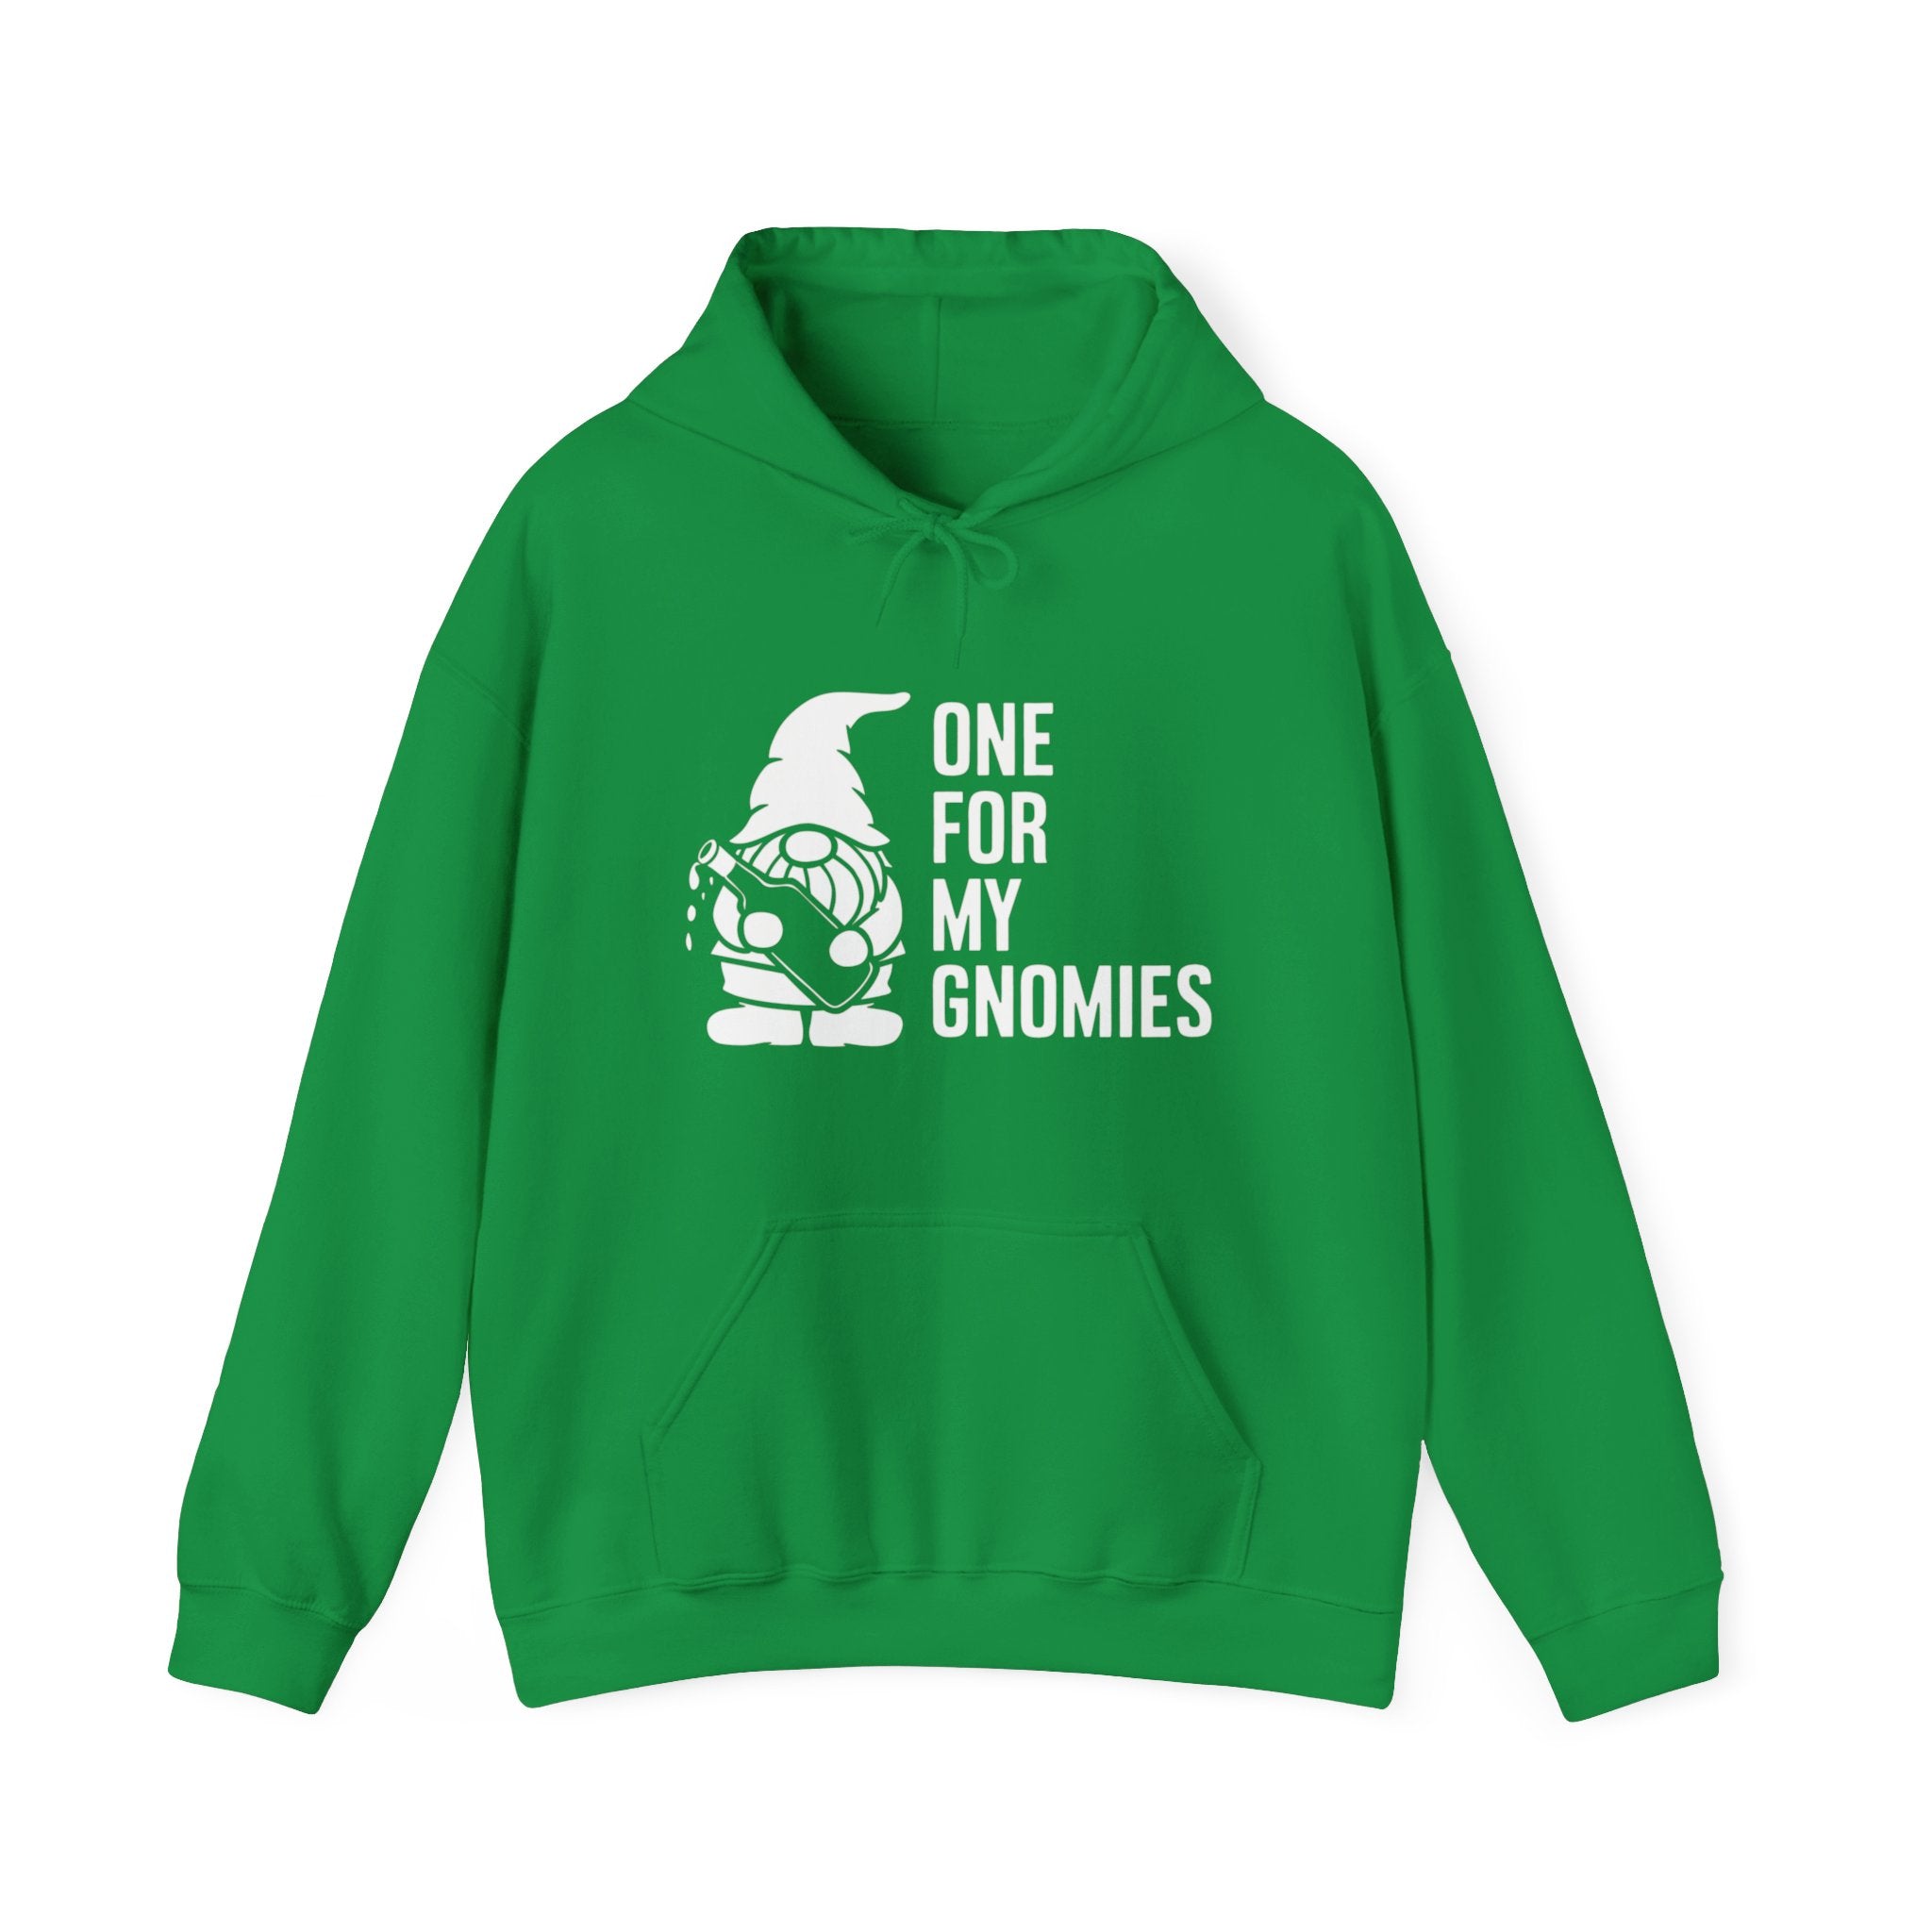 A One For My Gnomies - Hooded Sweatshirt featuring a graphic of a gnome and the text "One for my gnomies" printed in white on the front, crafted from a heavy blend for ultimate comfort.